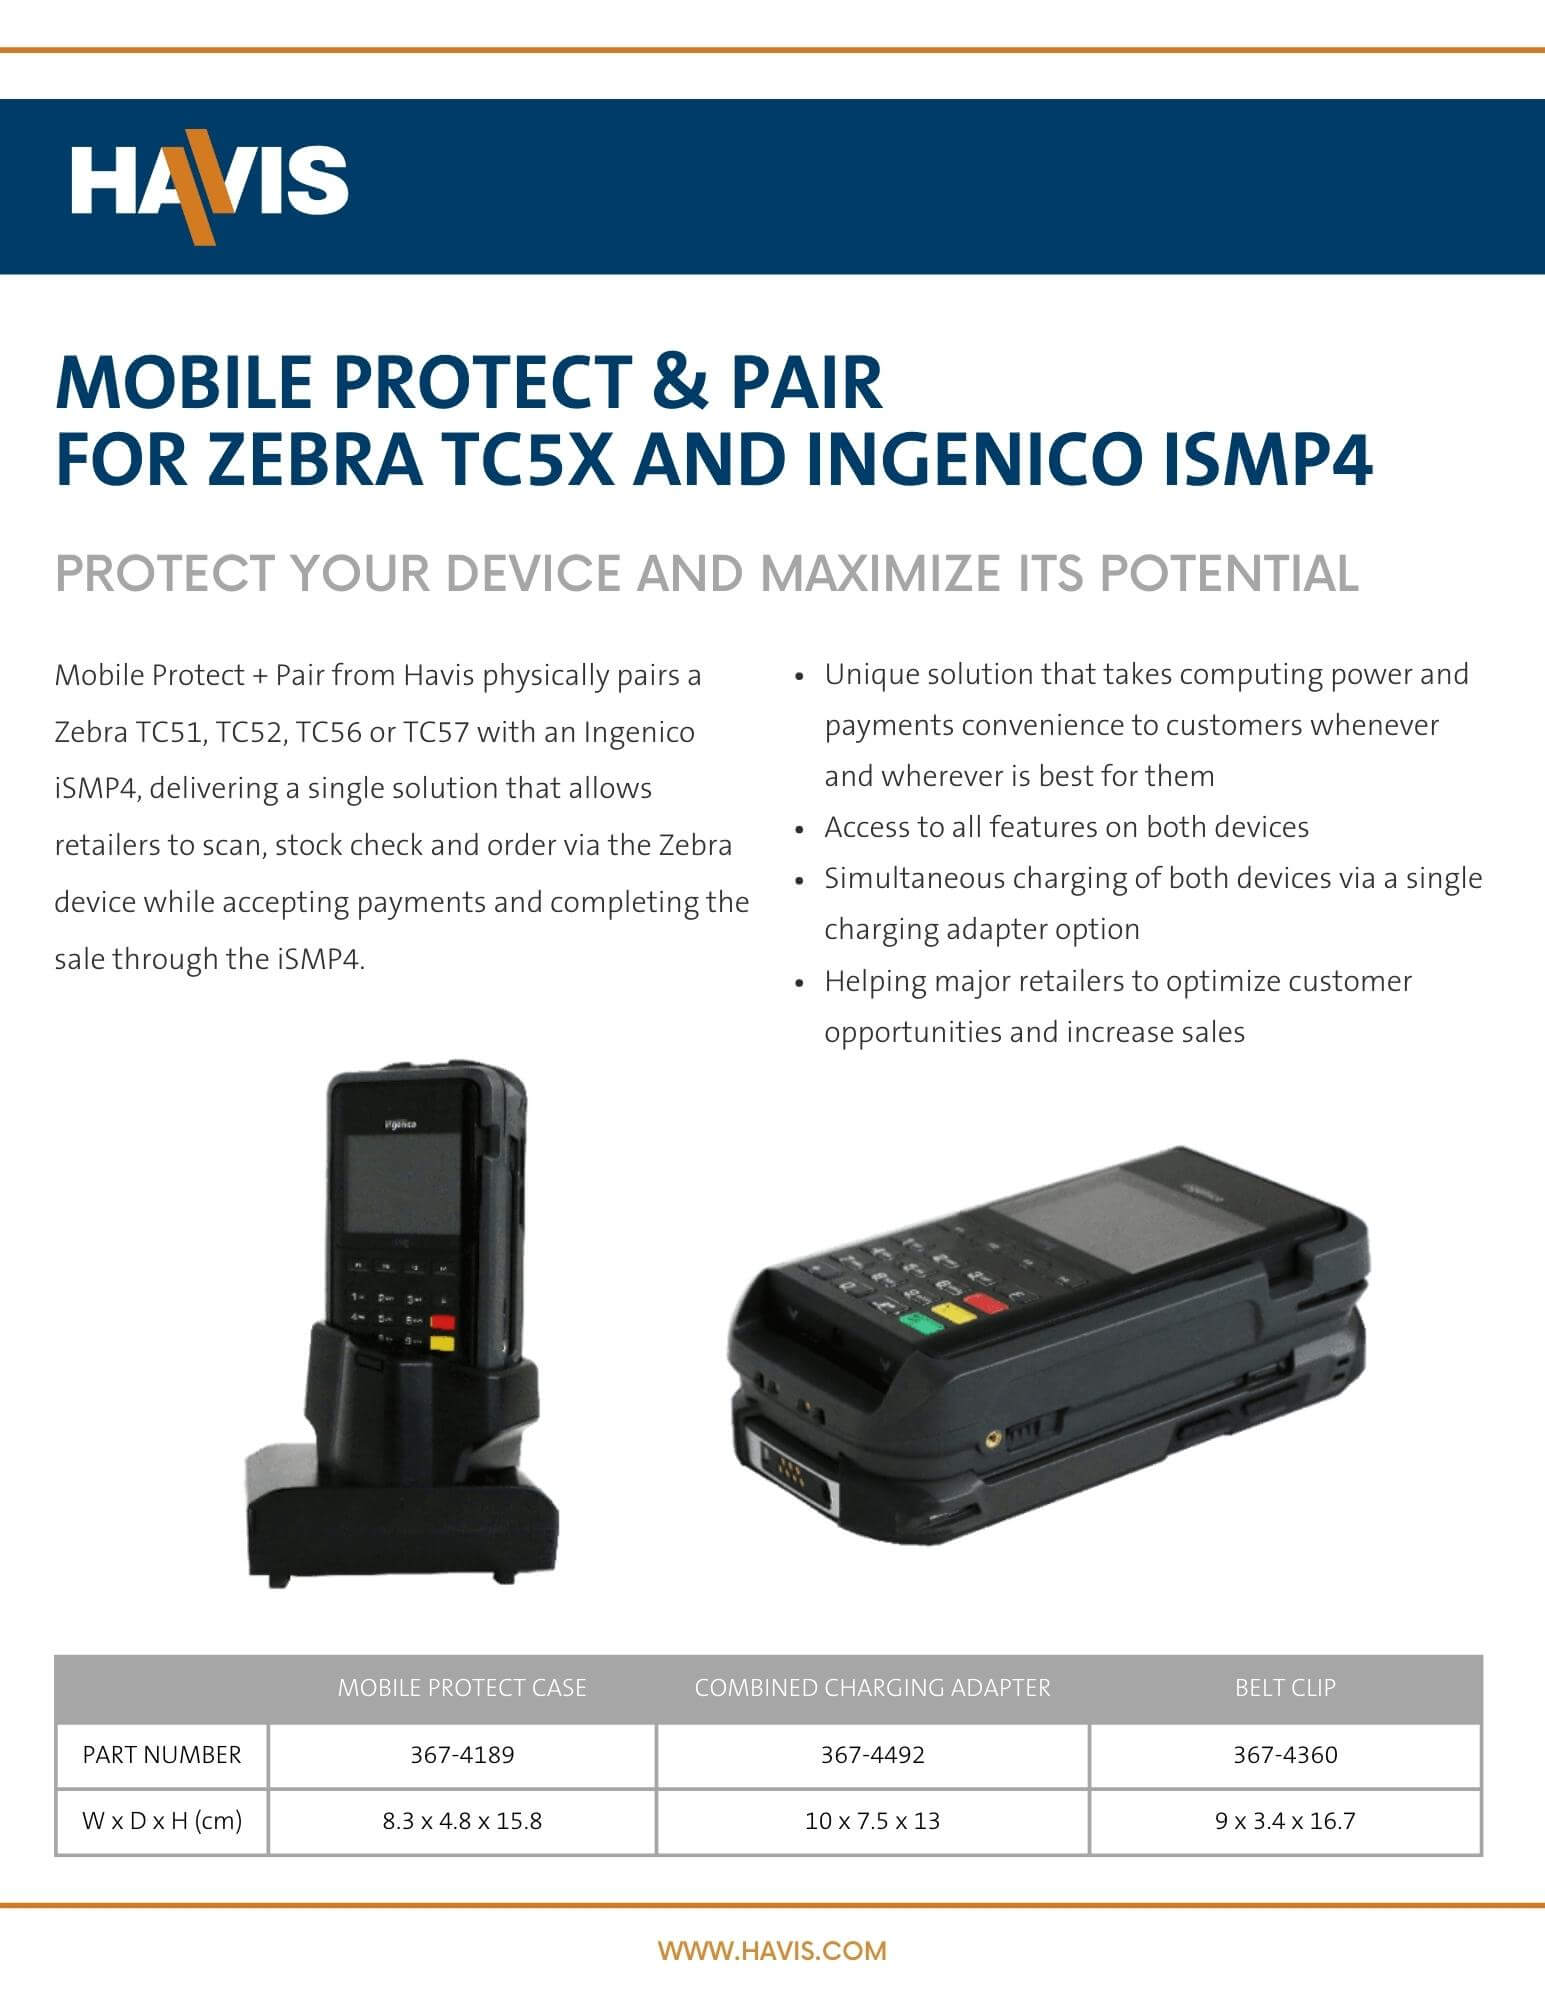 Mobile Protect & Pair for Zebra TC5X and Ingenico iSMP4 - Datasheet